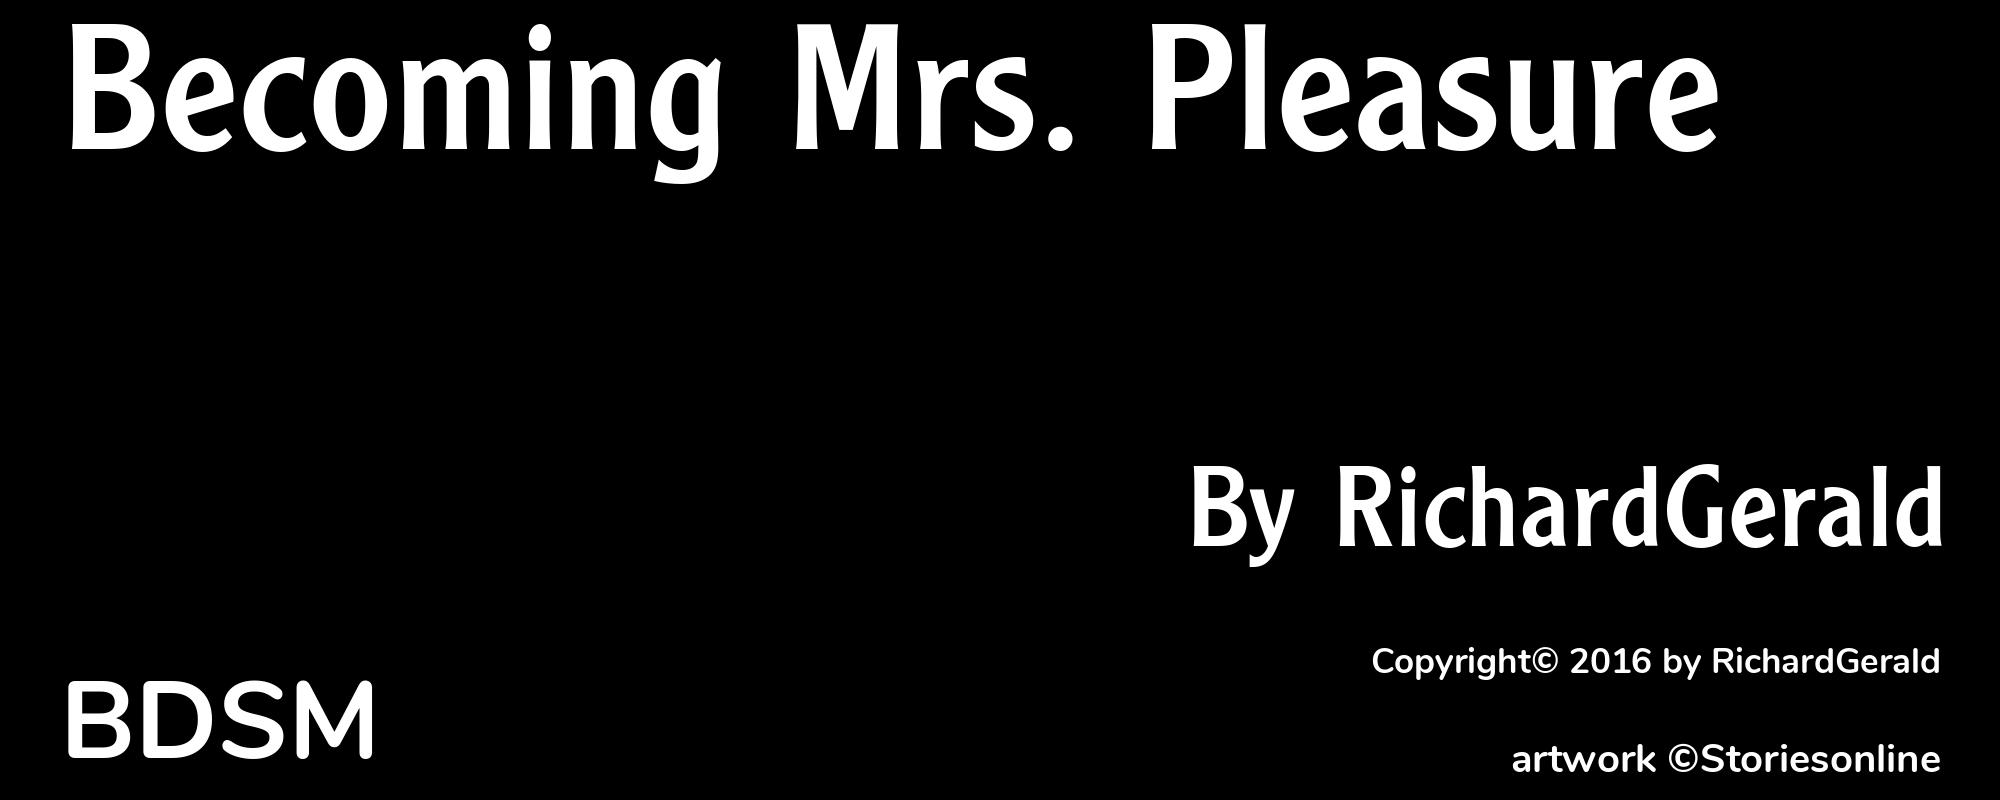 Becoming Mrs. Pleasure - Cover